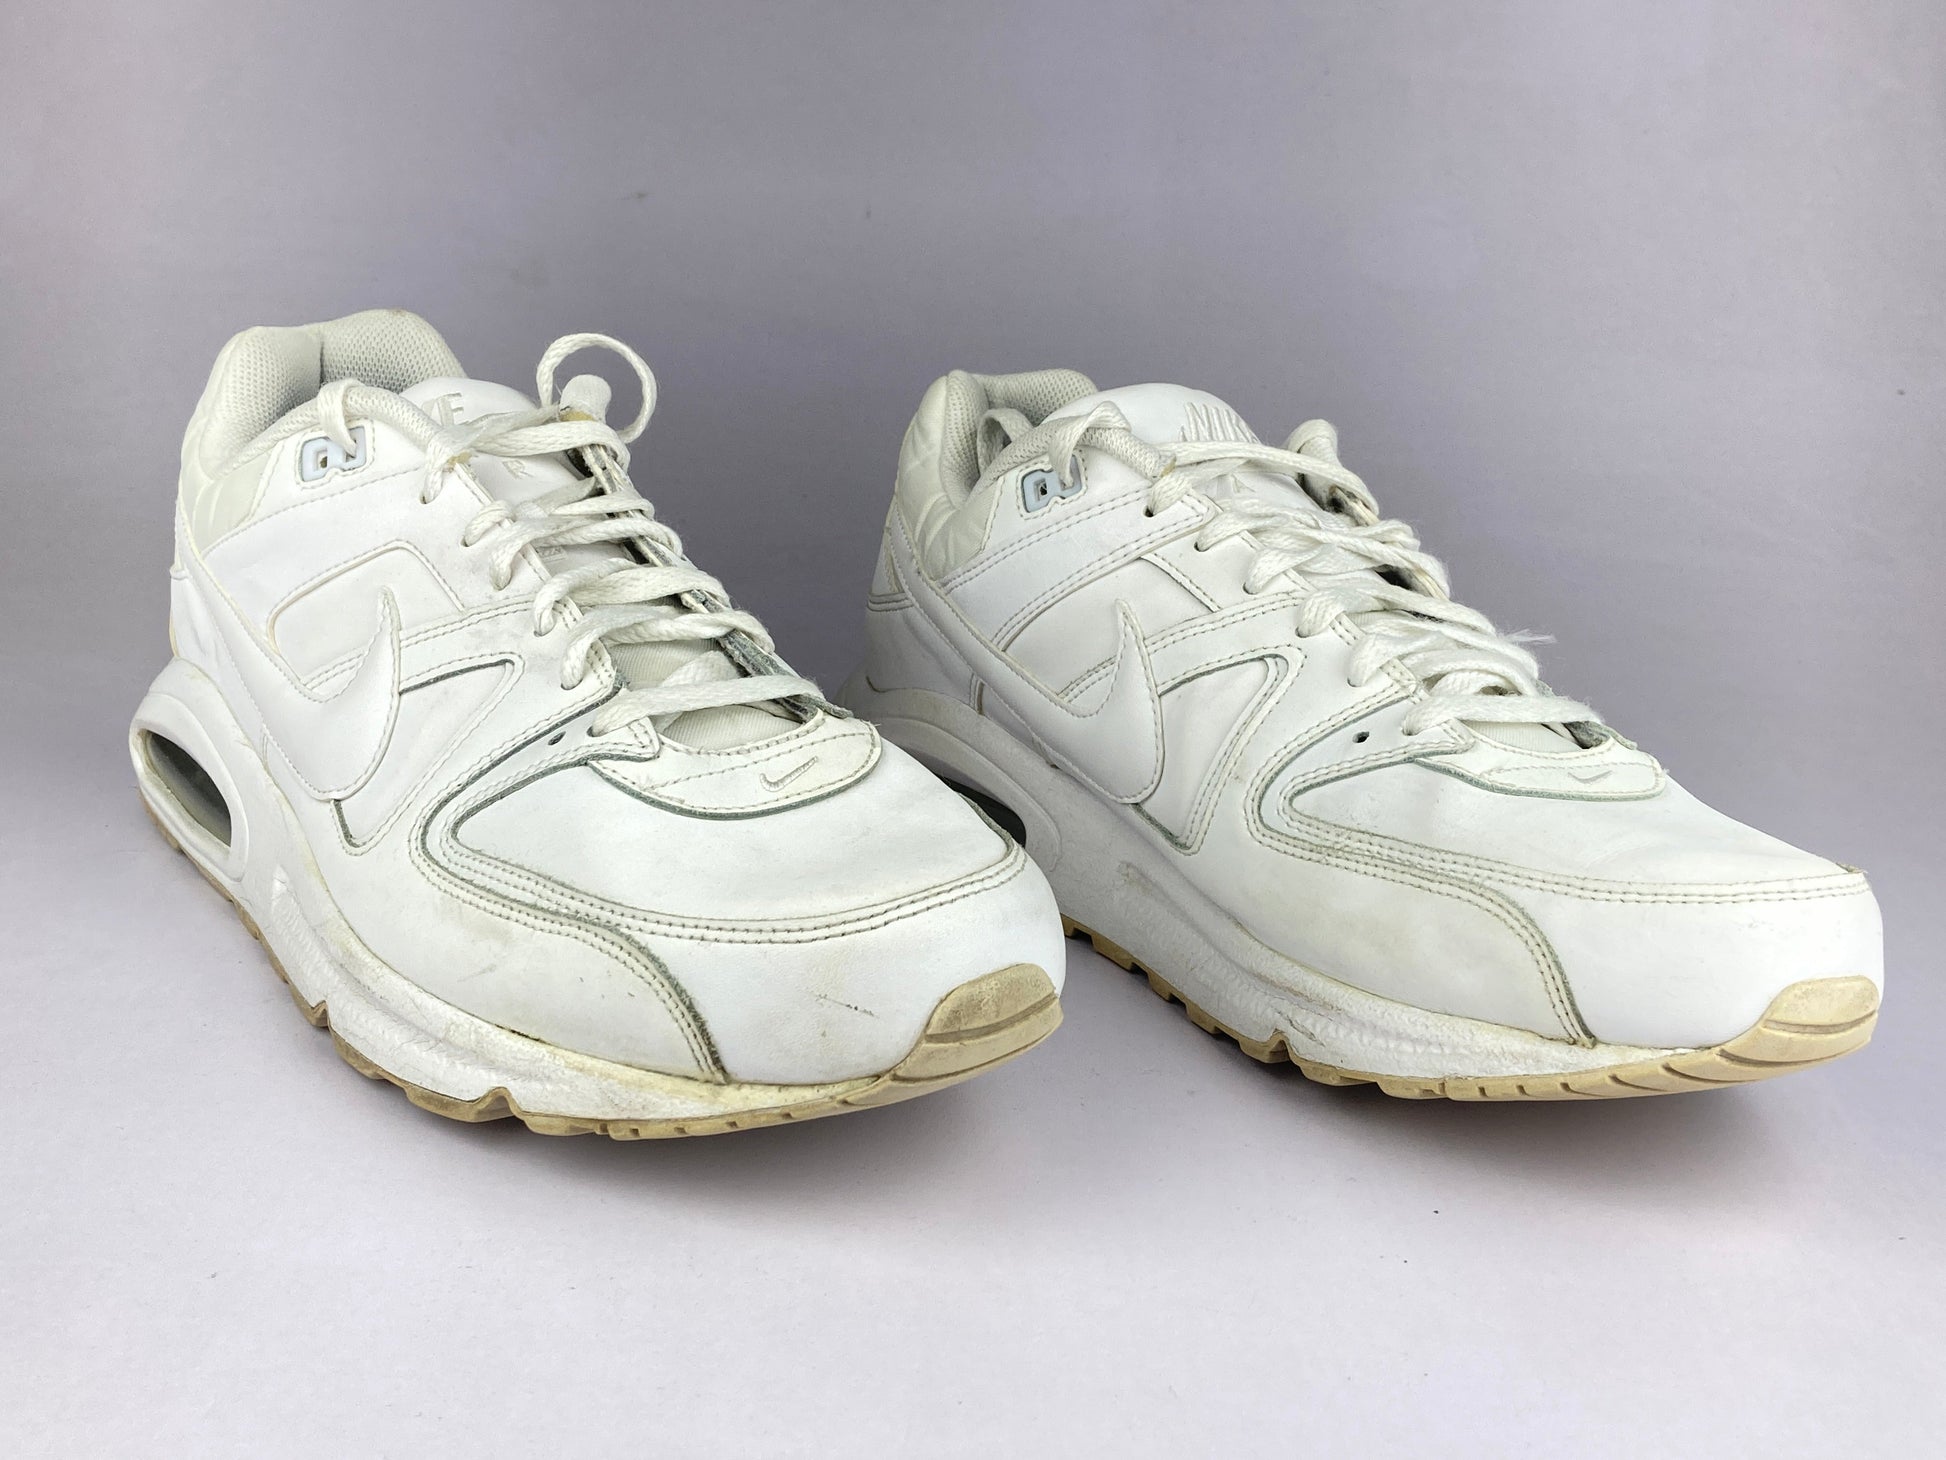 Nike Air Max Command Leather 'White' 749760-102